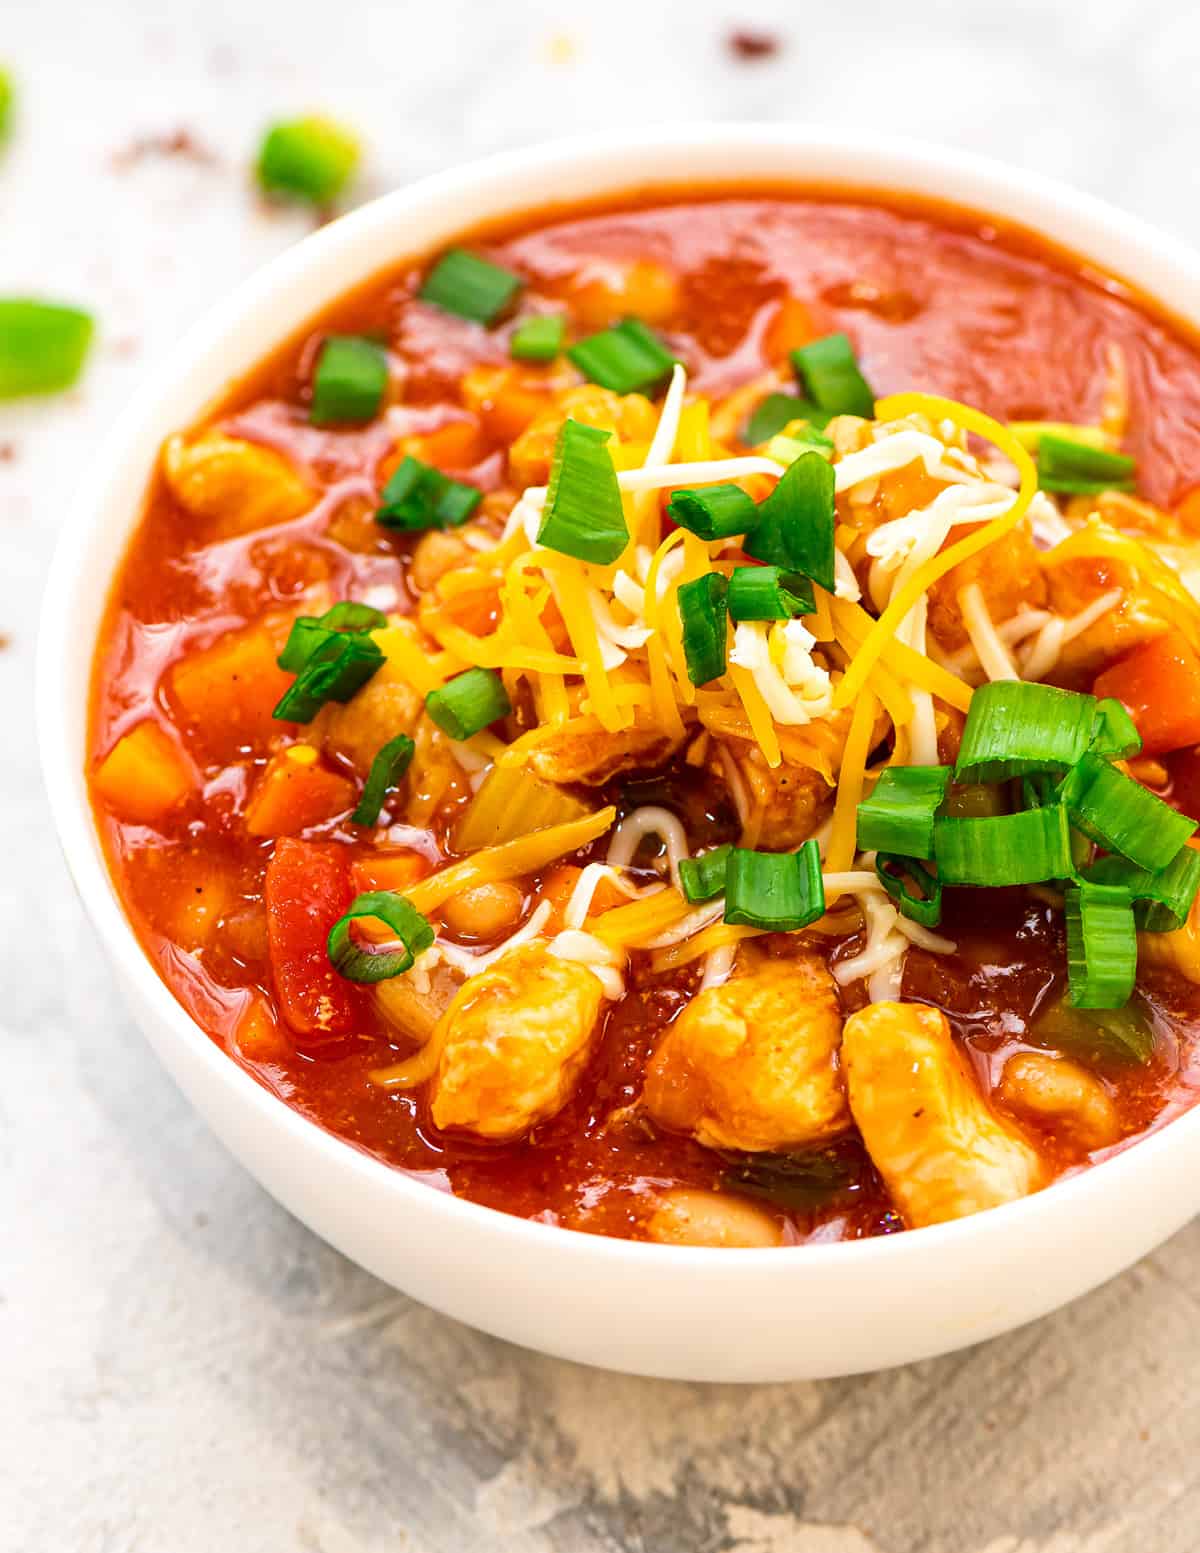 Buffalo Chicken Chili (Instant Pot or Stove Top)